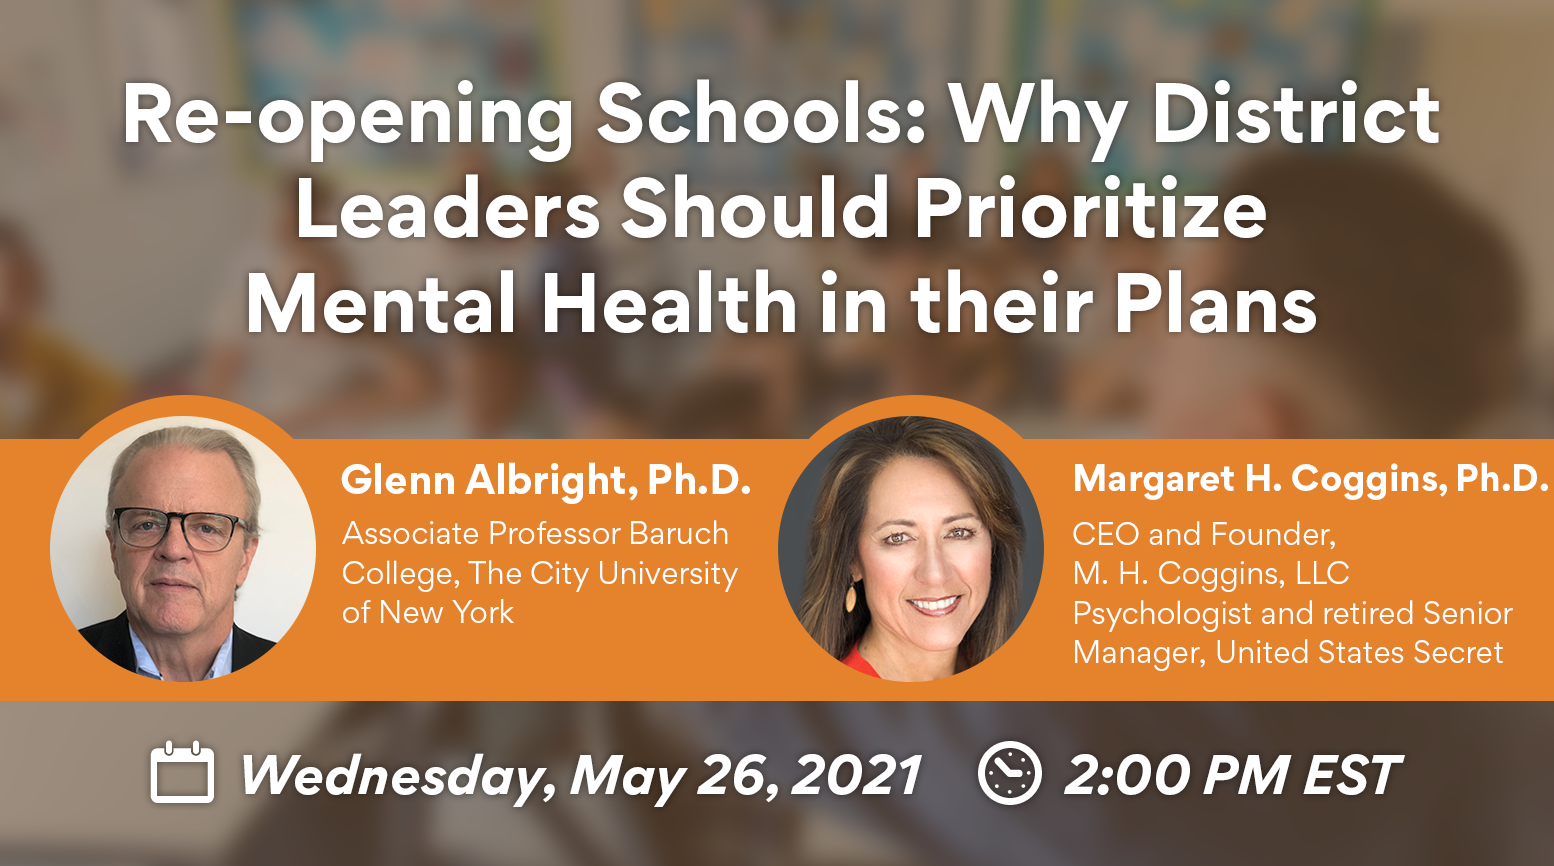 Re-opening Schools: Why District Leaders Should Prioritize Mental Health in their Plans